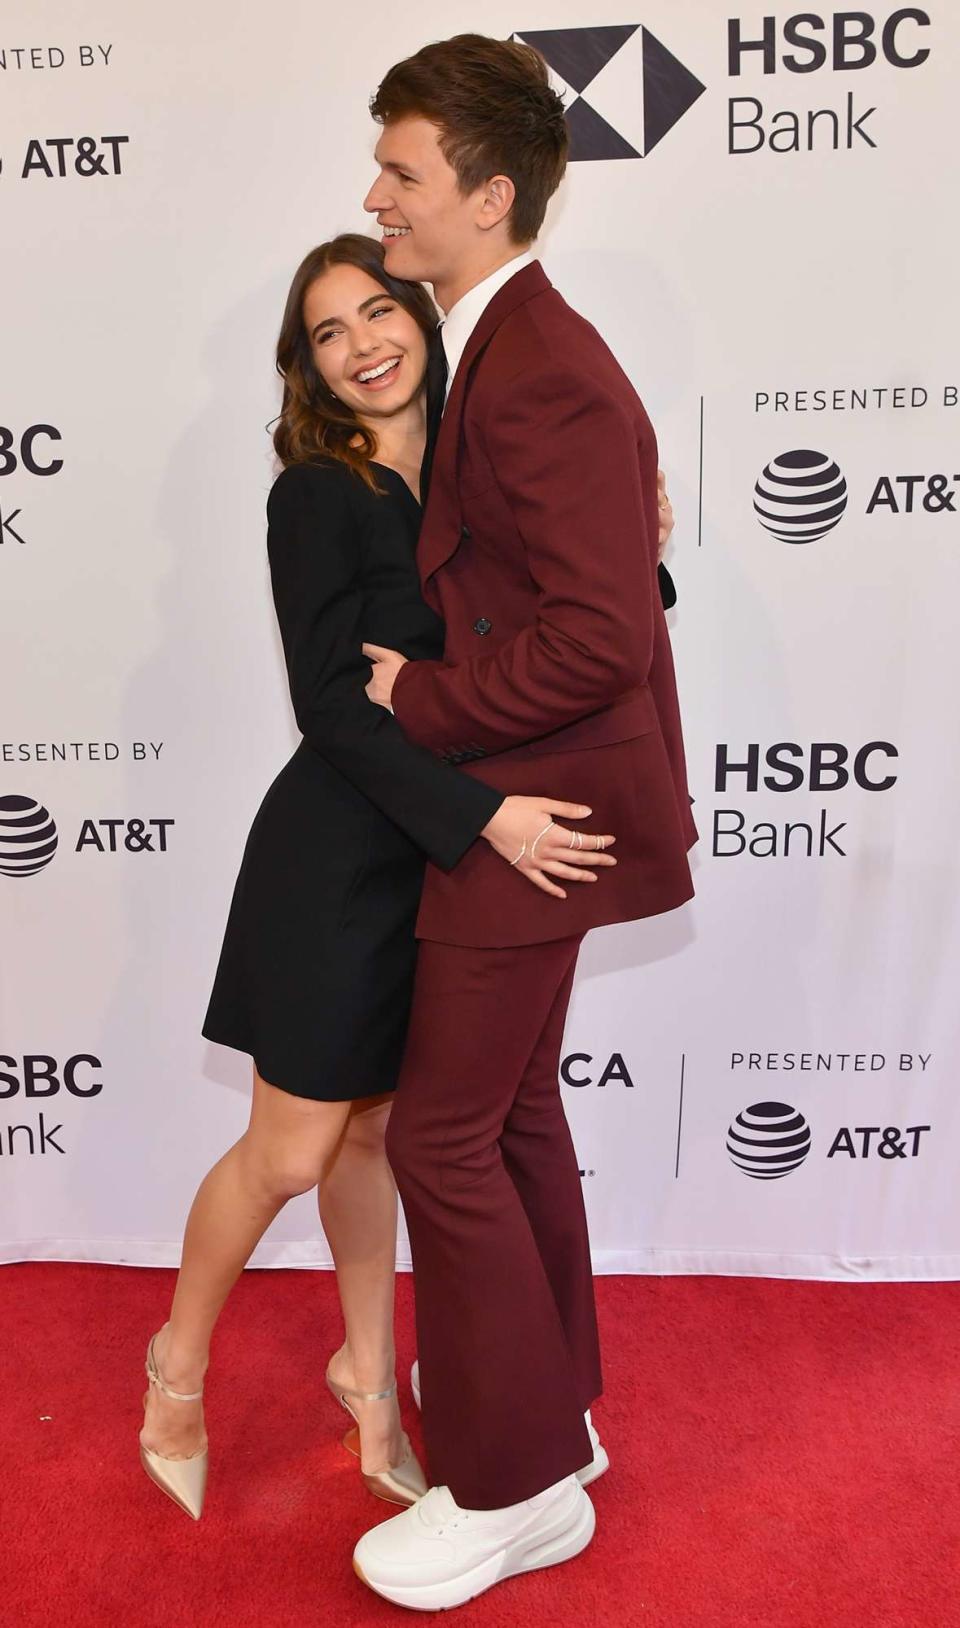 Violetta Komyshan and Ansel Elgort attend a screening of "Jonathan" during the 2018 Tribeca Film Festival at SVA Theatre on April 21, 2018 in New York City